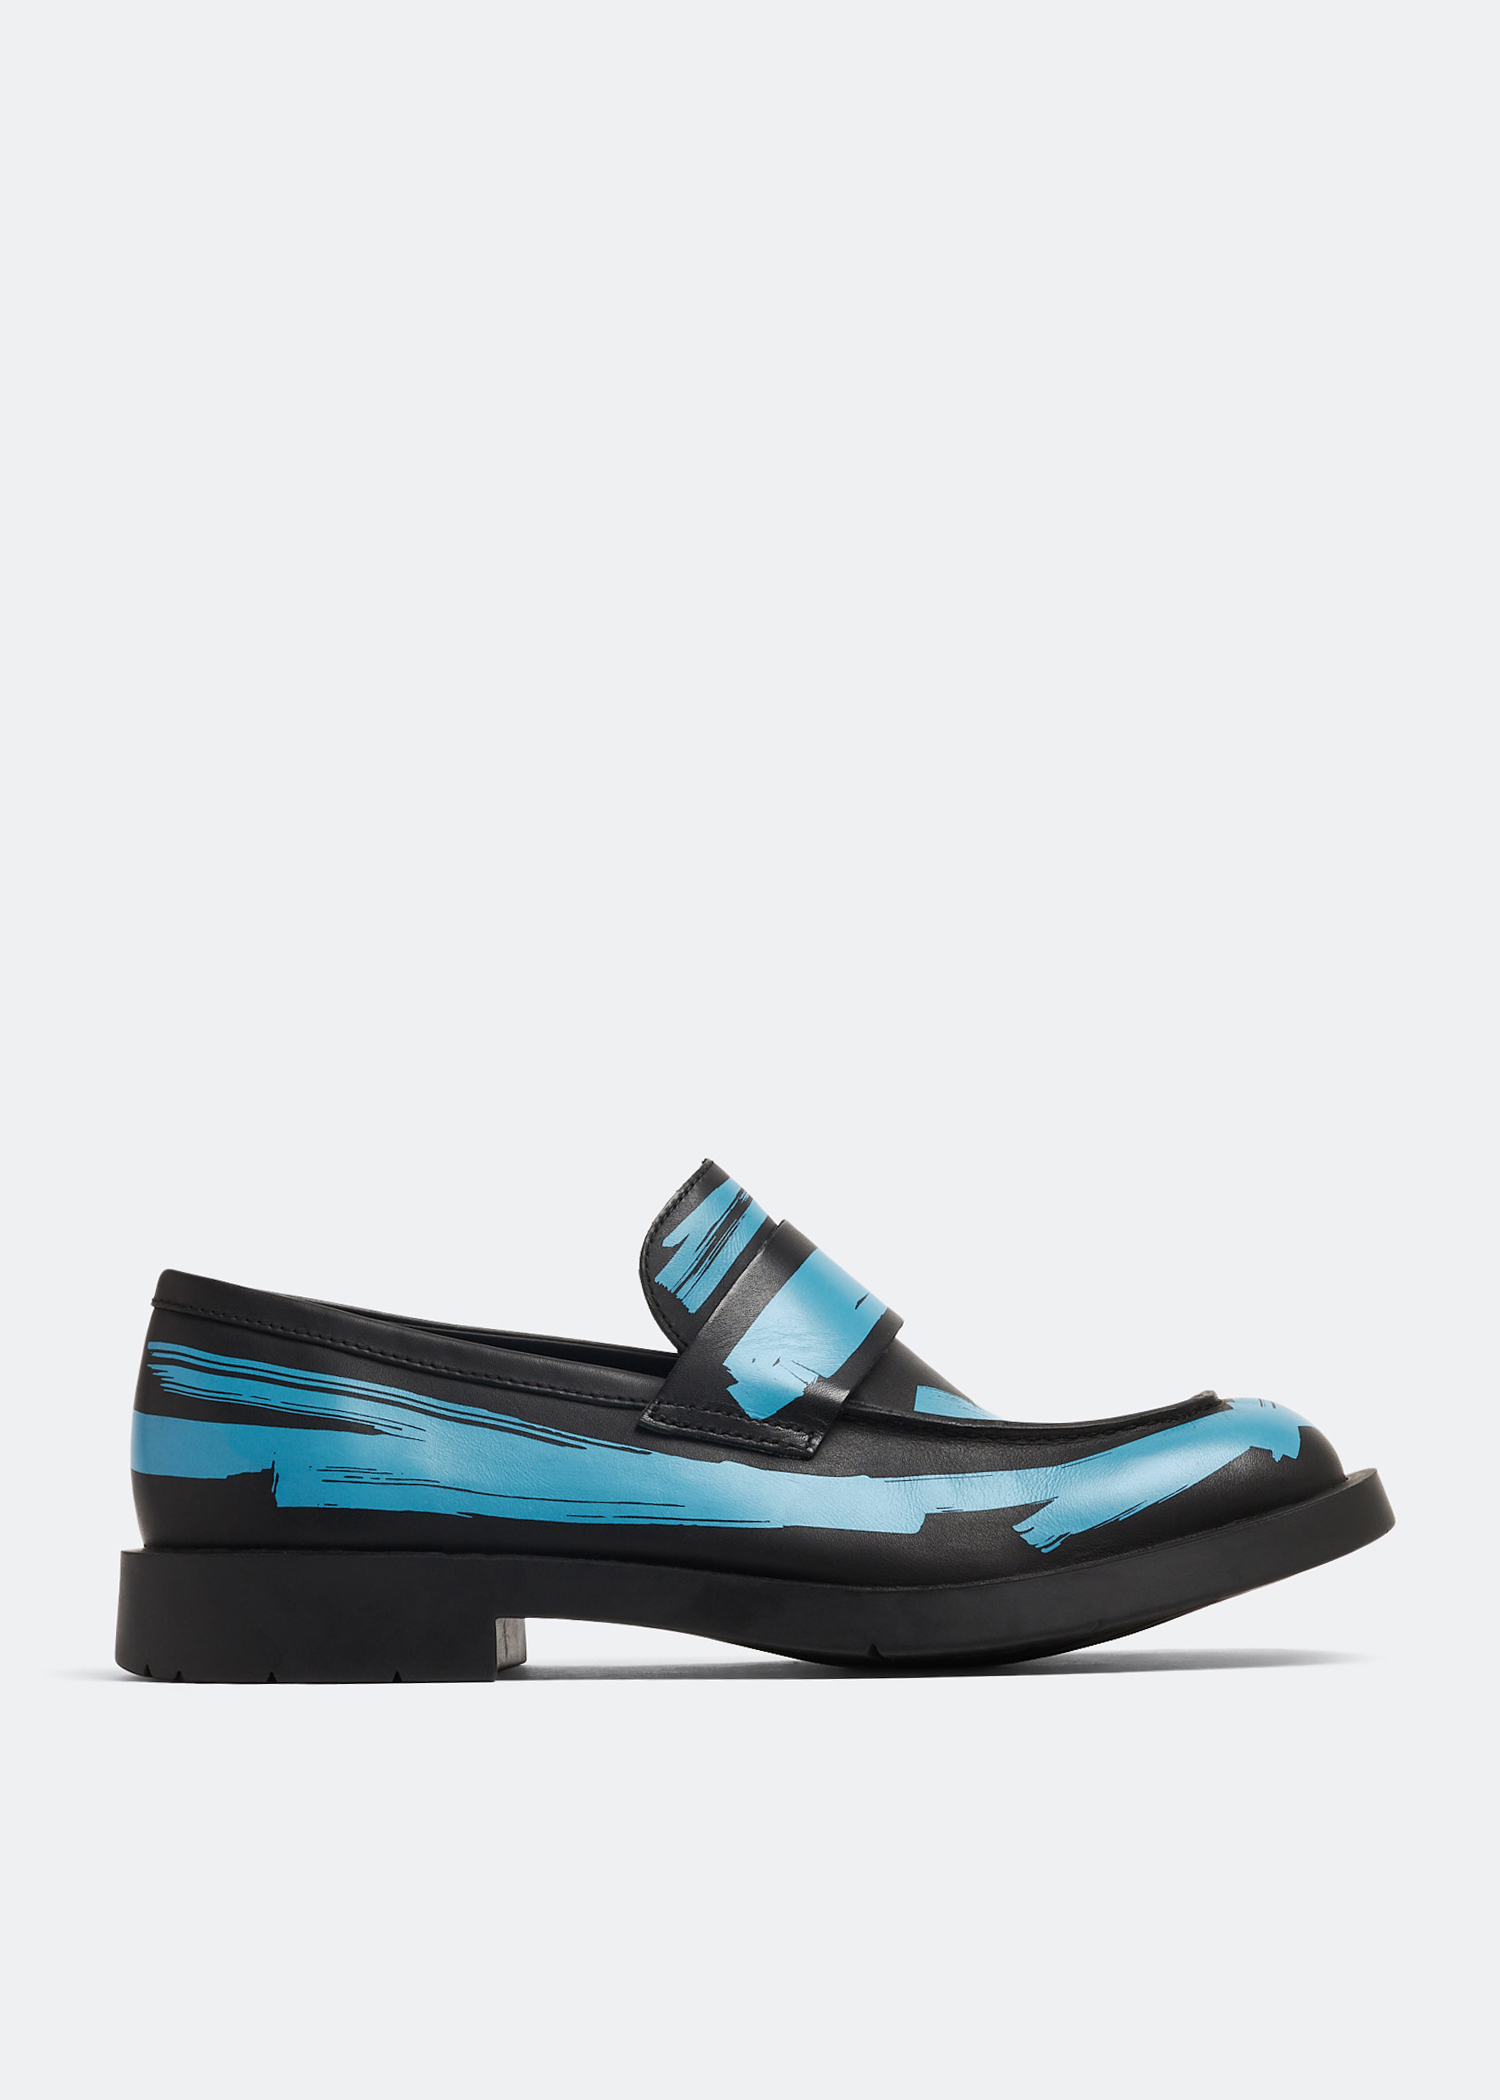 CAMPER LAB MIL1978 BACKLESS LOAFERS 27.0 【51%OFF!】 - 靴